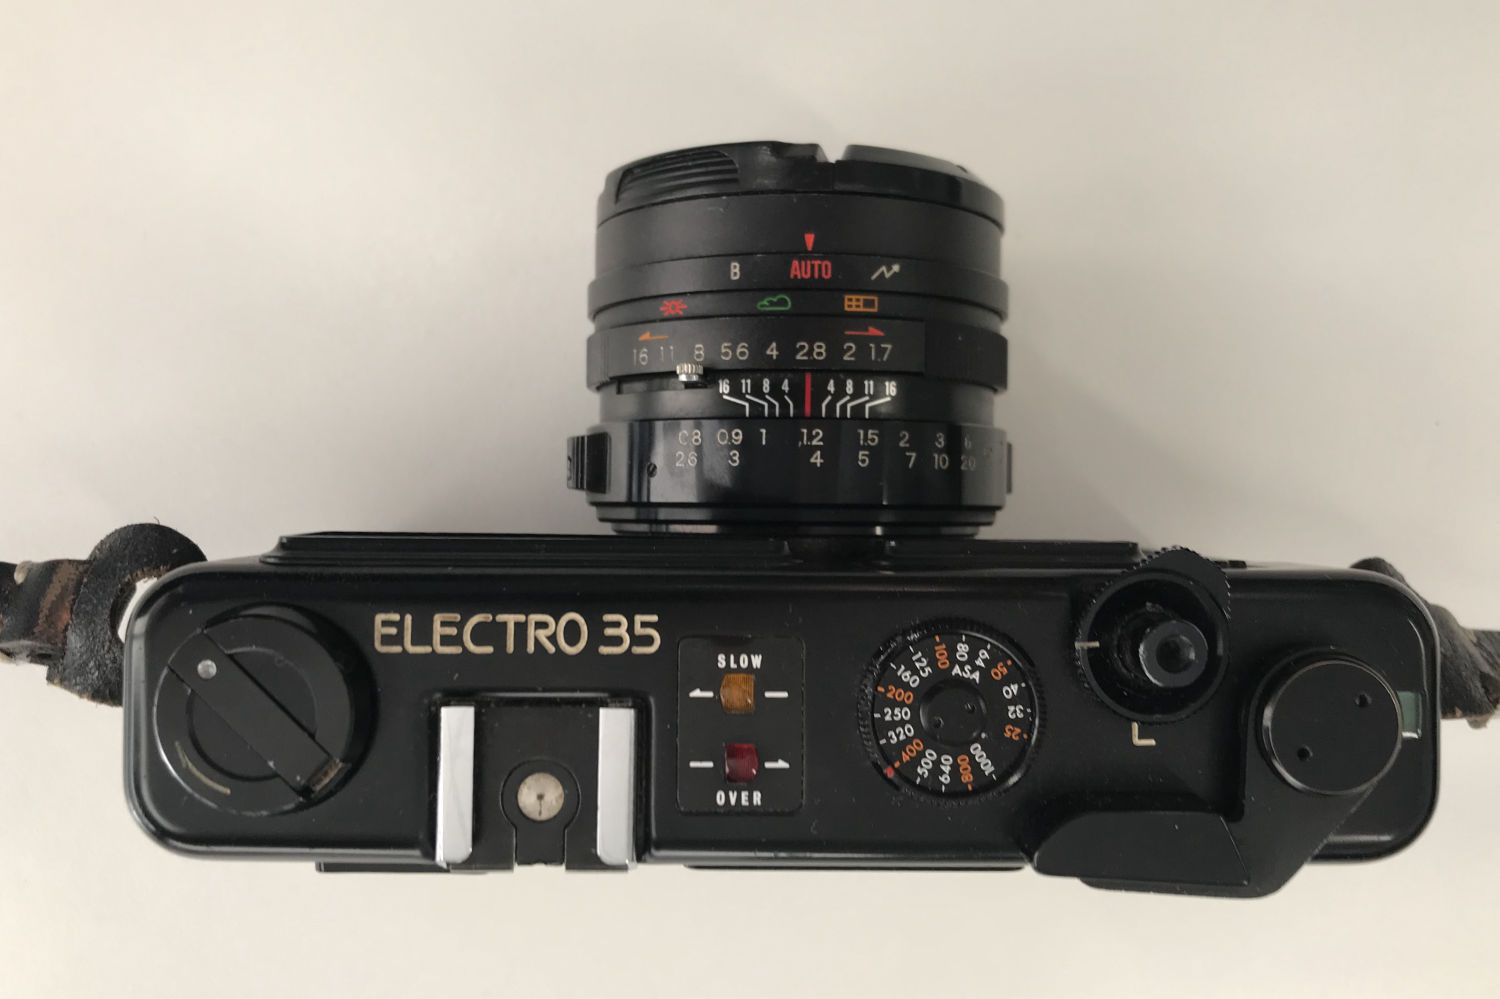 Electro 35 Top Plate